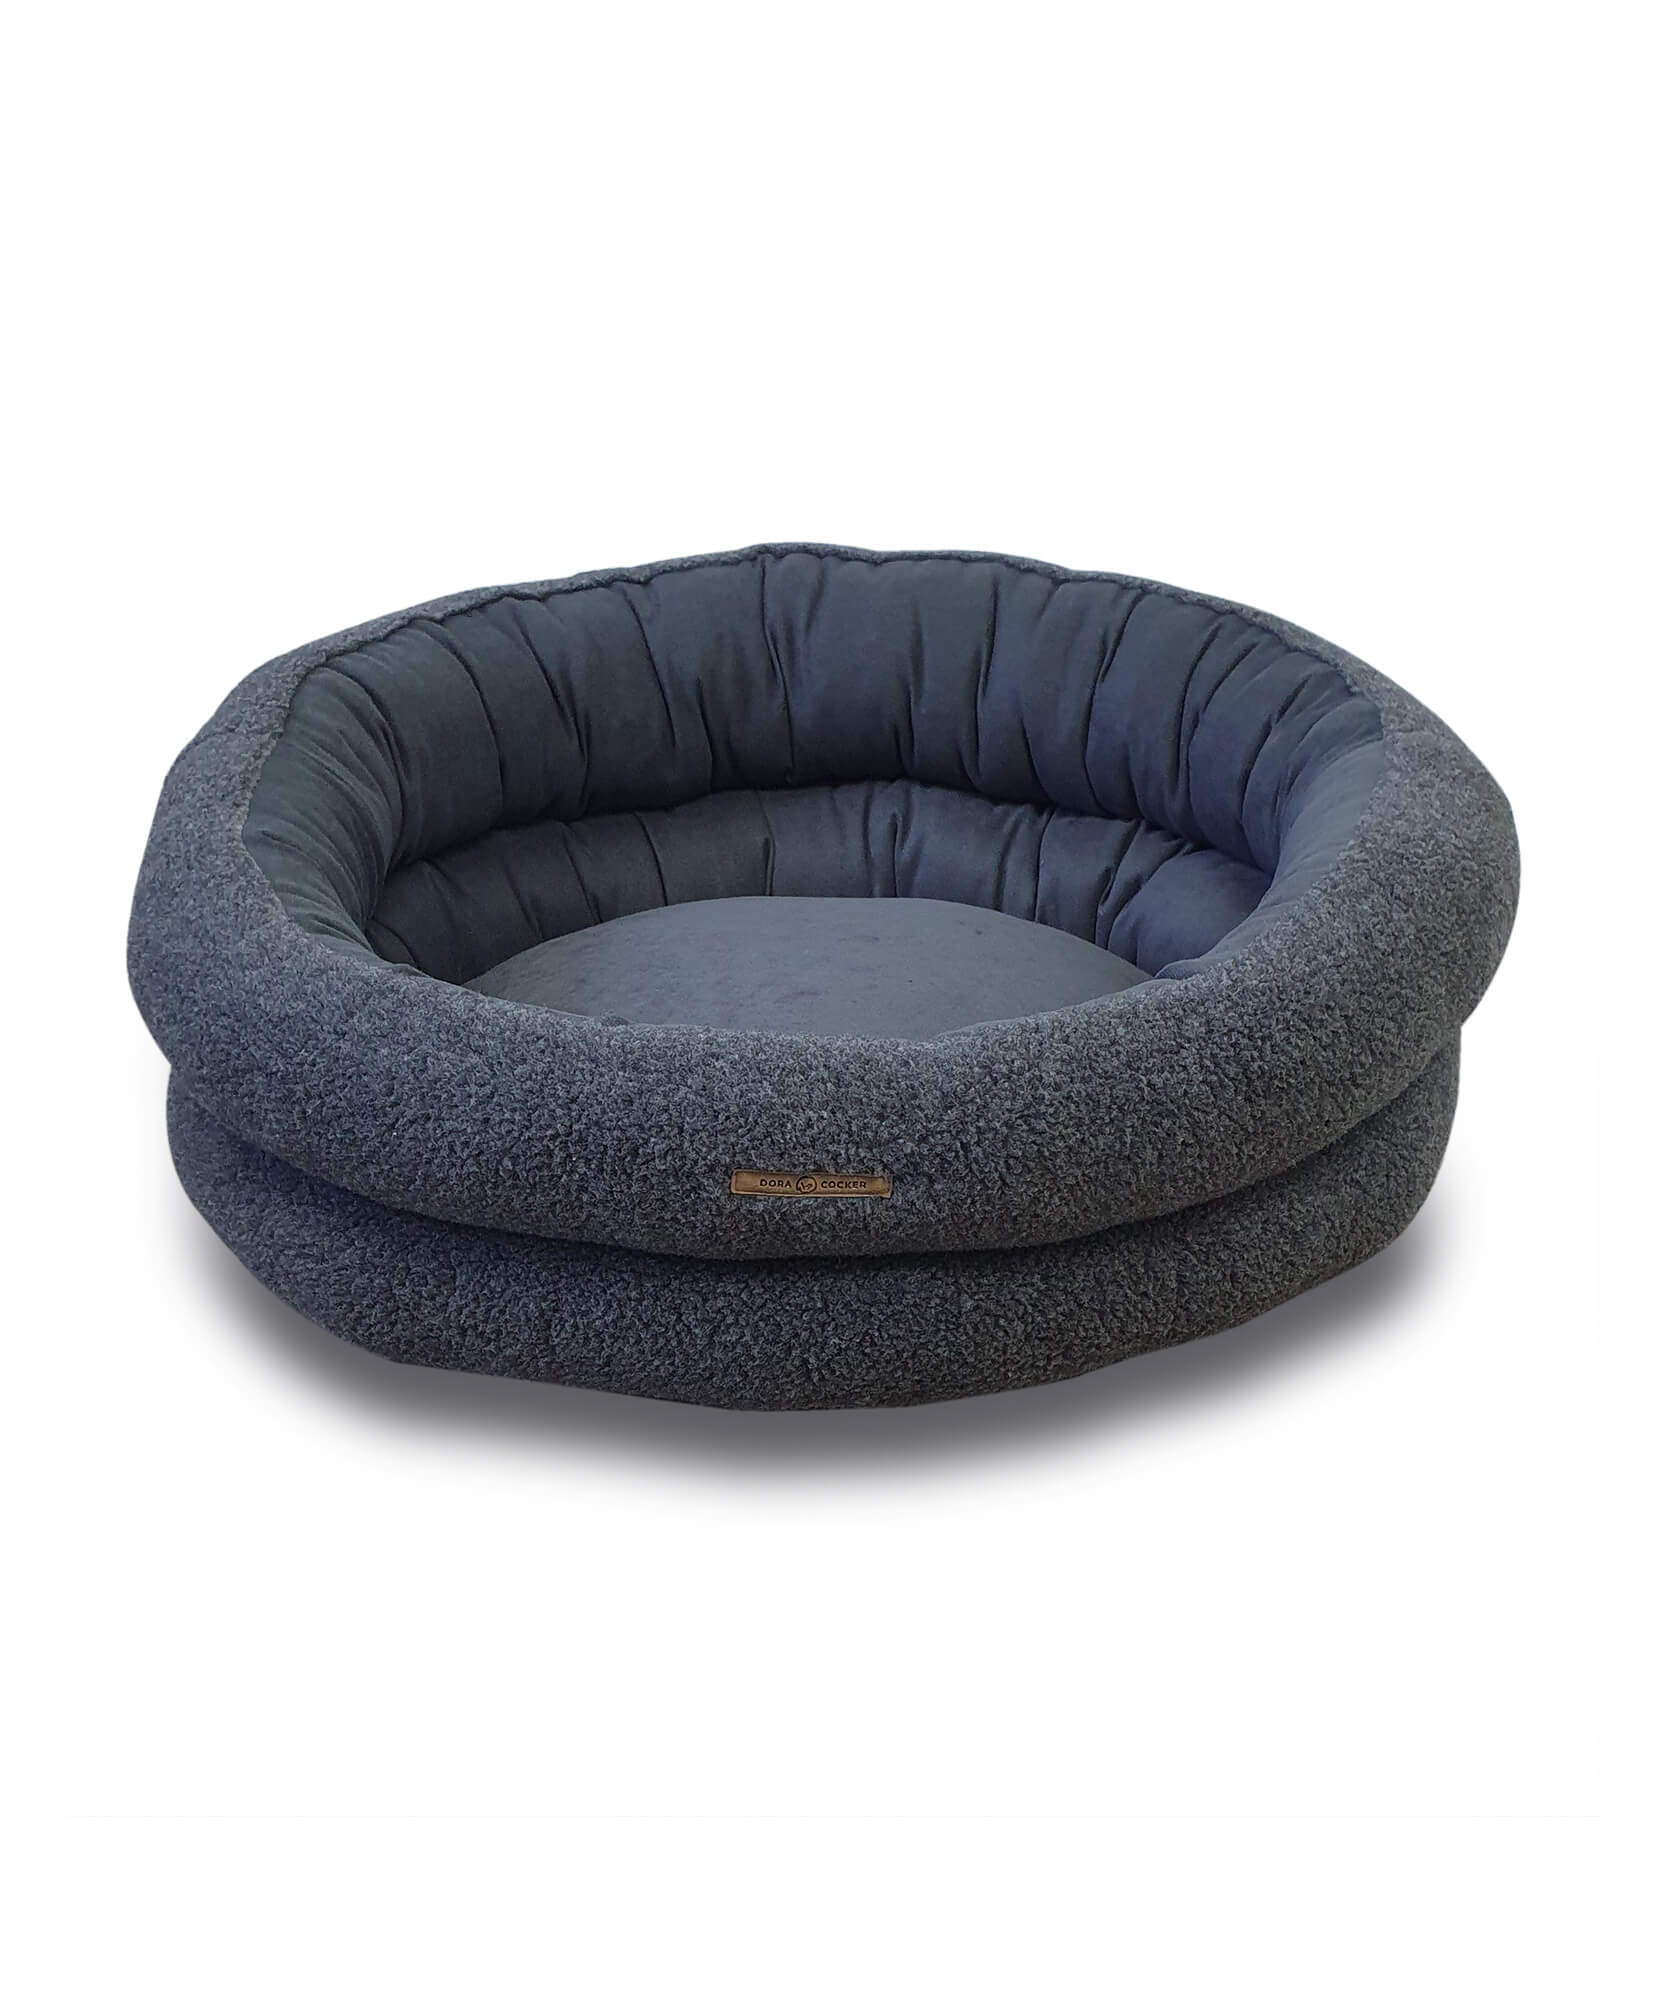 Antiallergic Dog and cat bed "Two-sided wheel" Dark grey with Merino wool